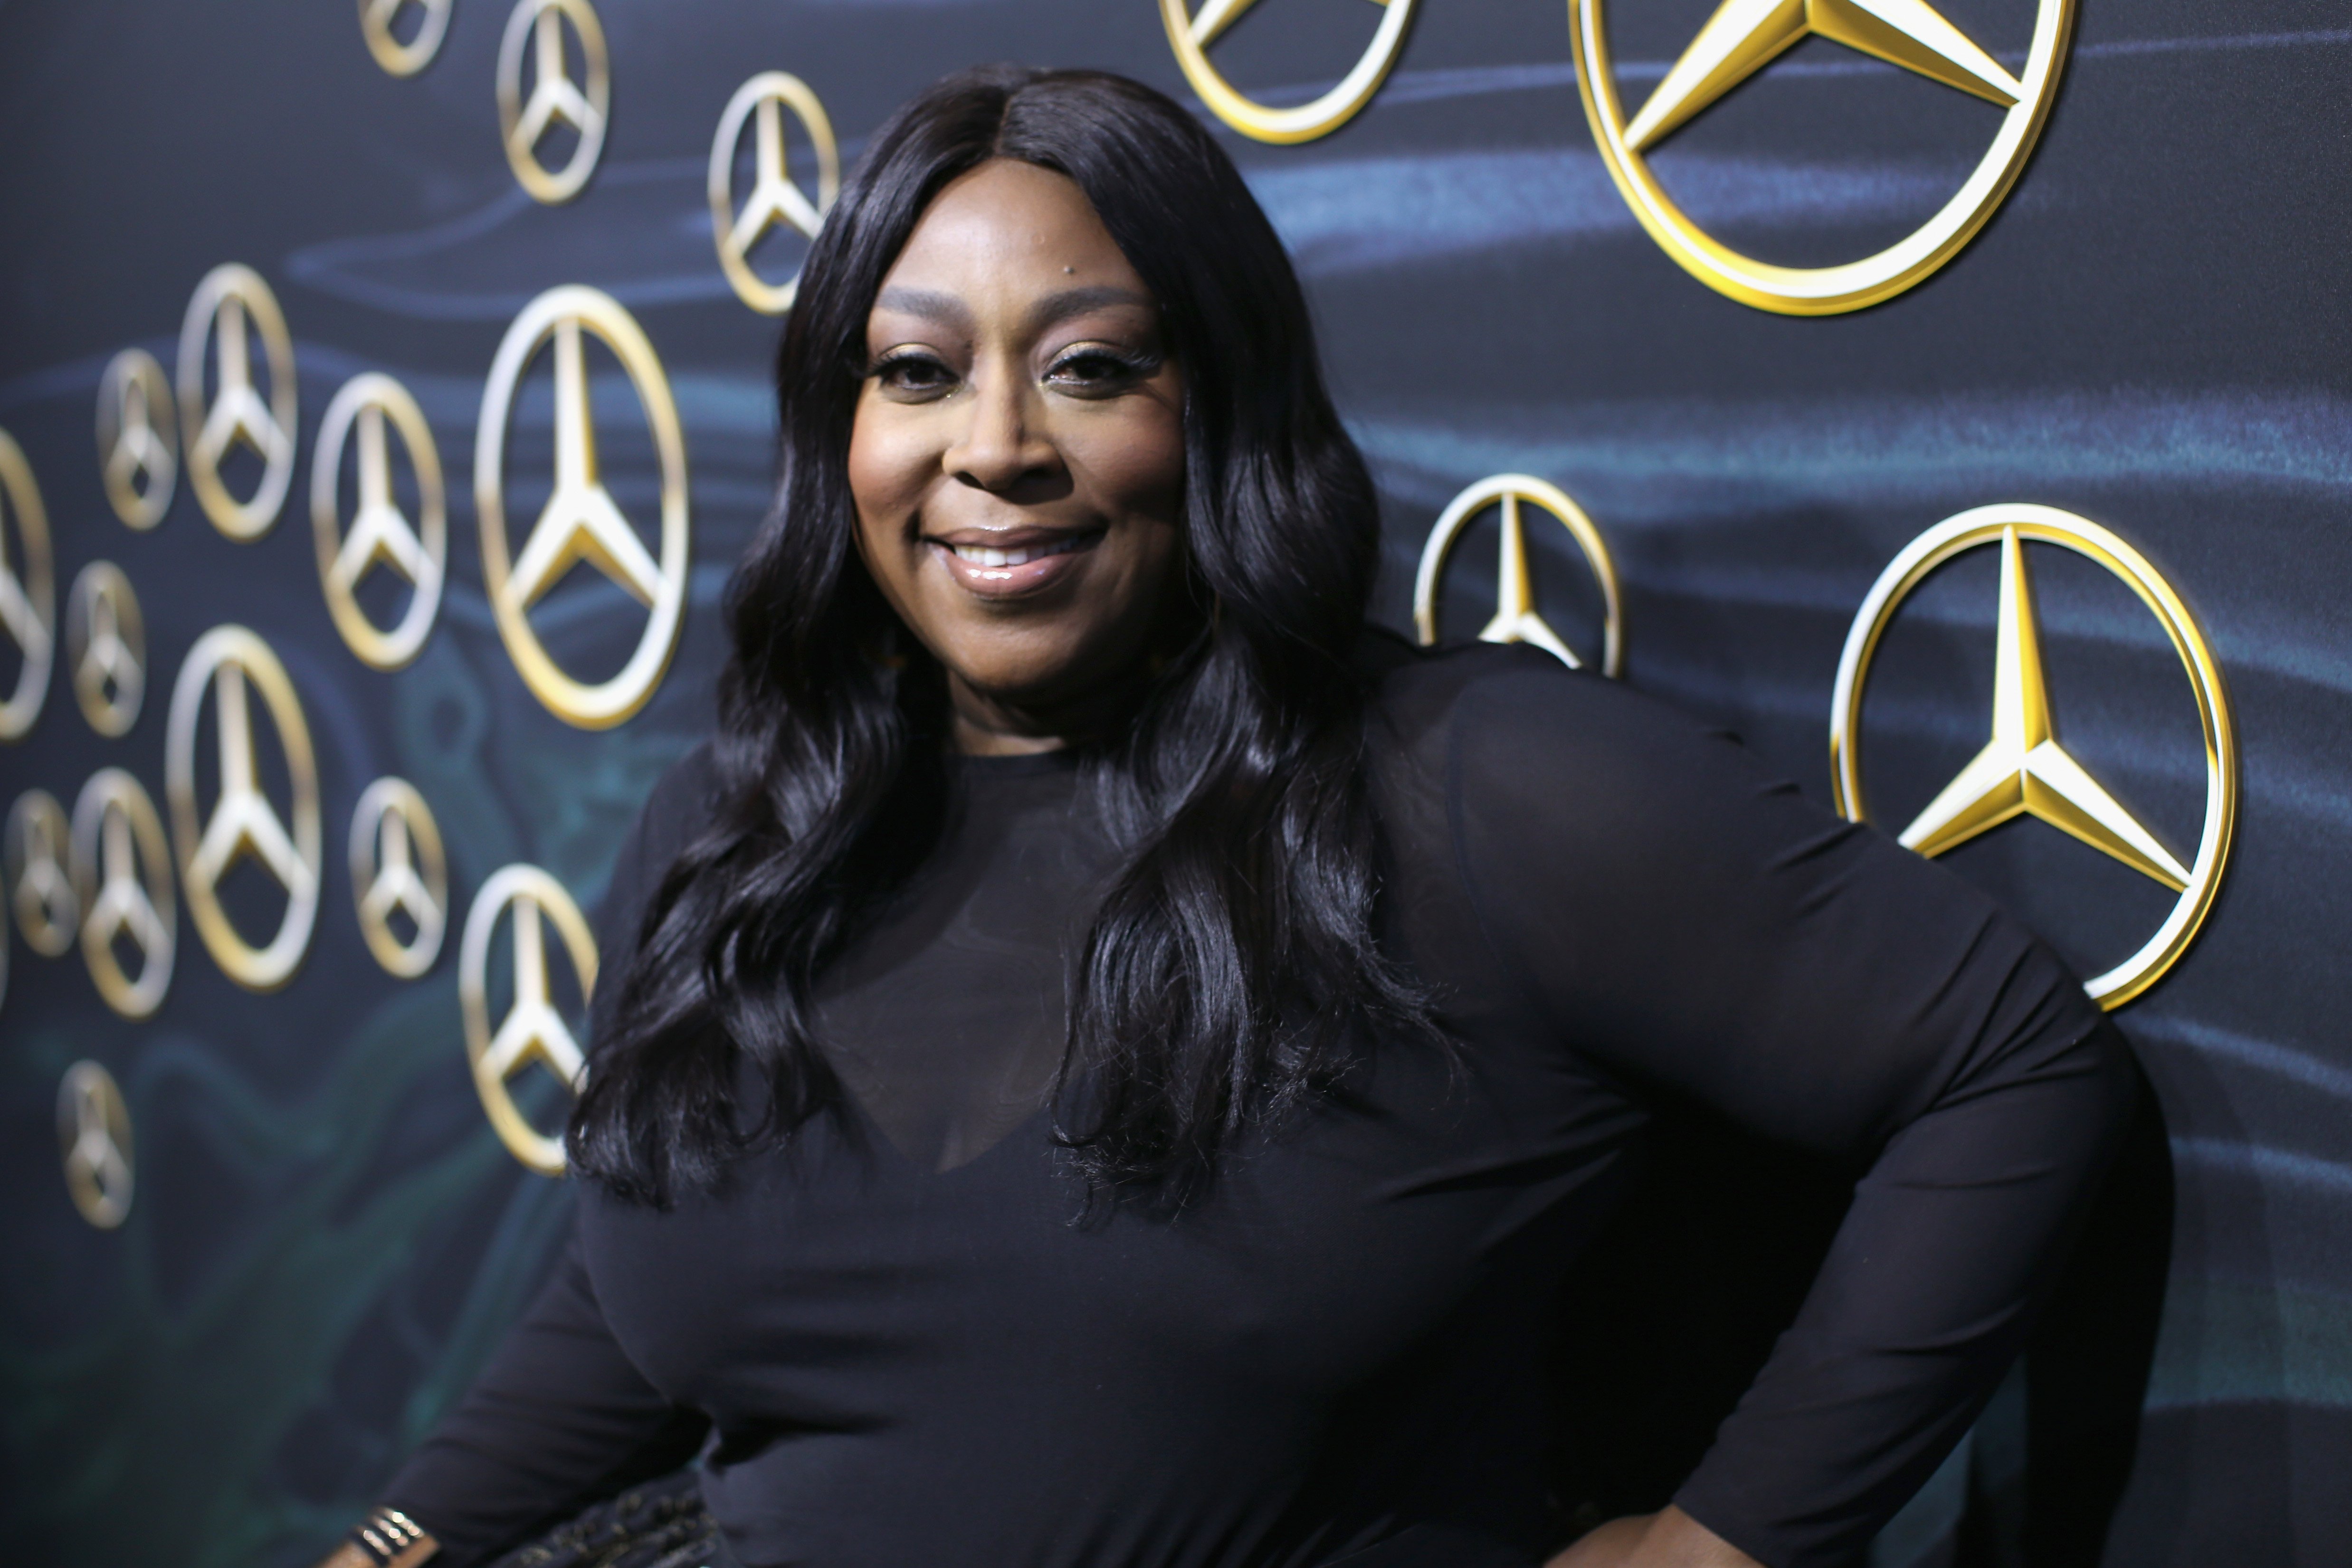 Loni Love atending an awards viewing party in March 2018. | Photo: Getty Images